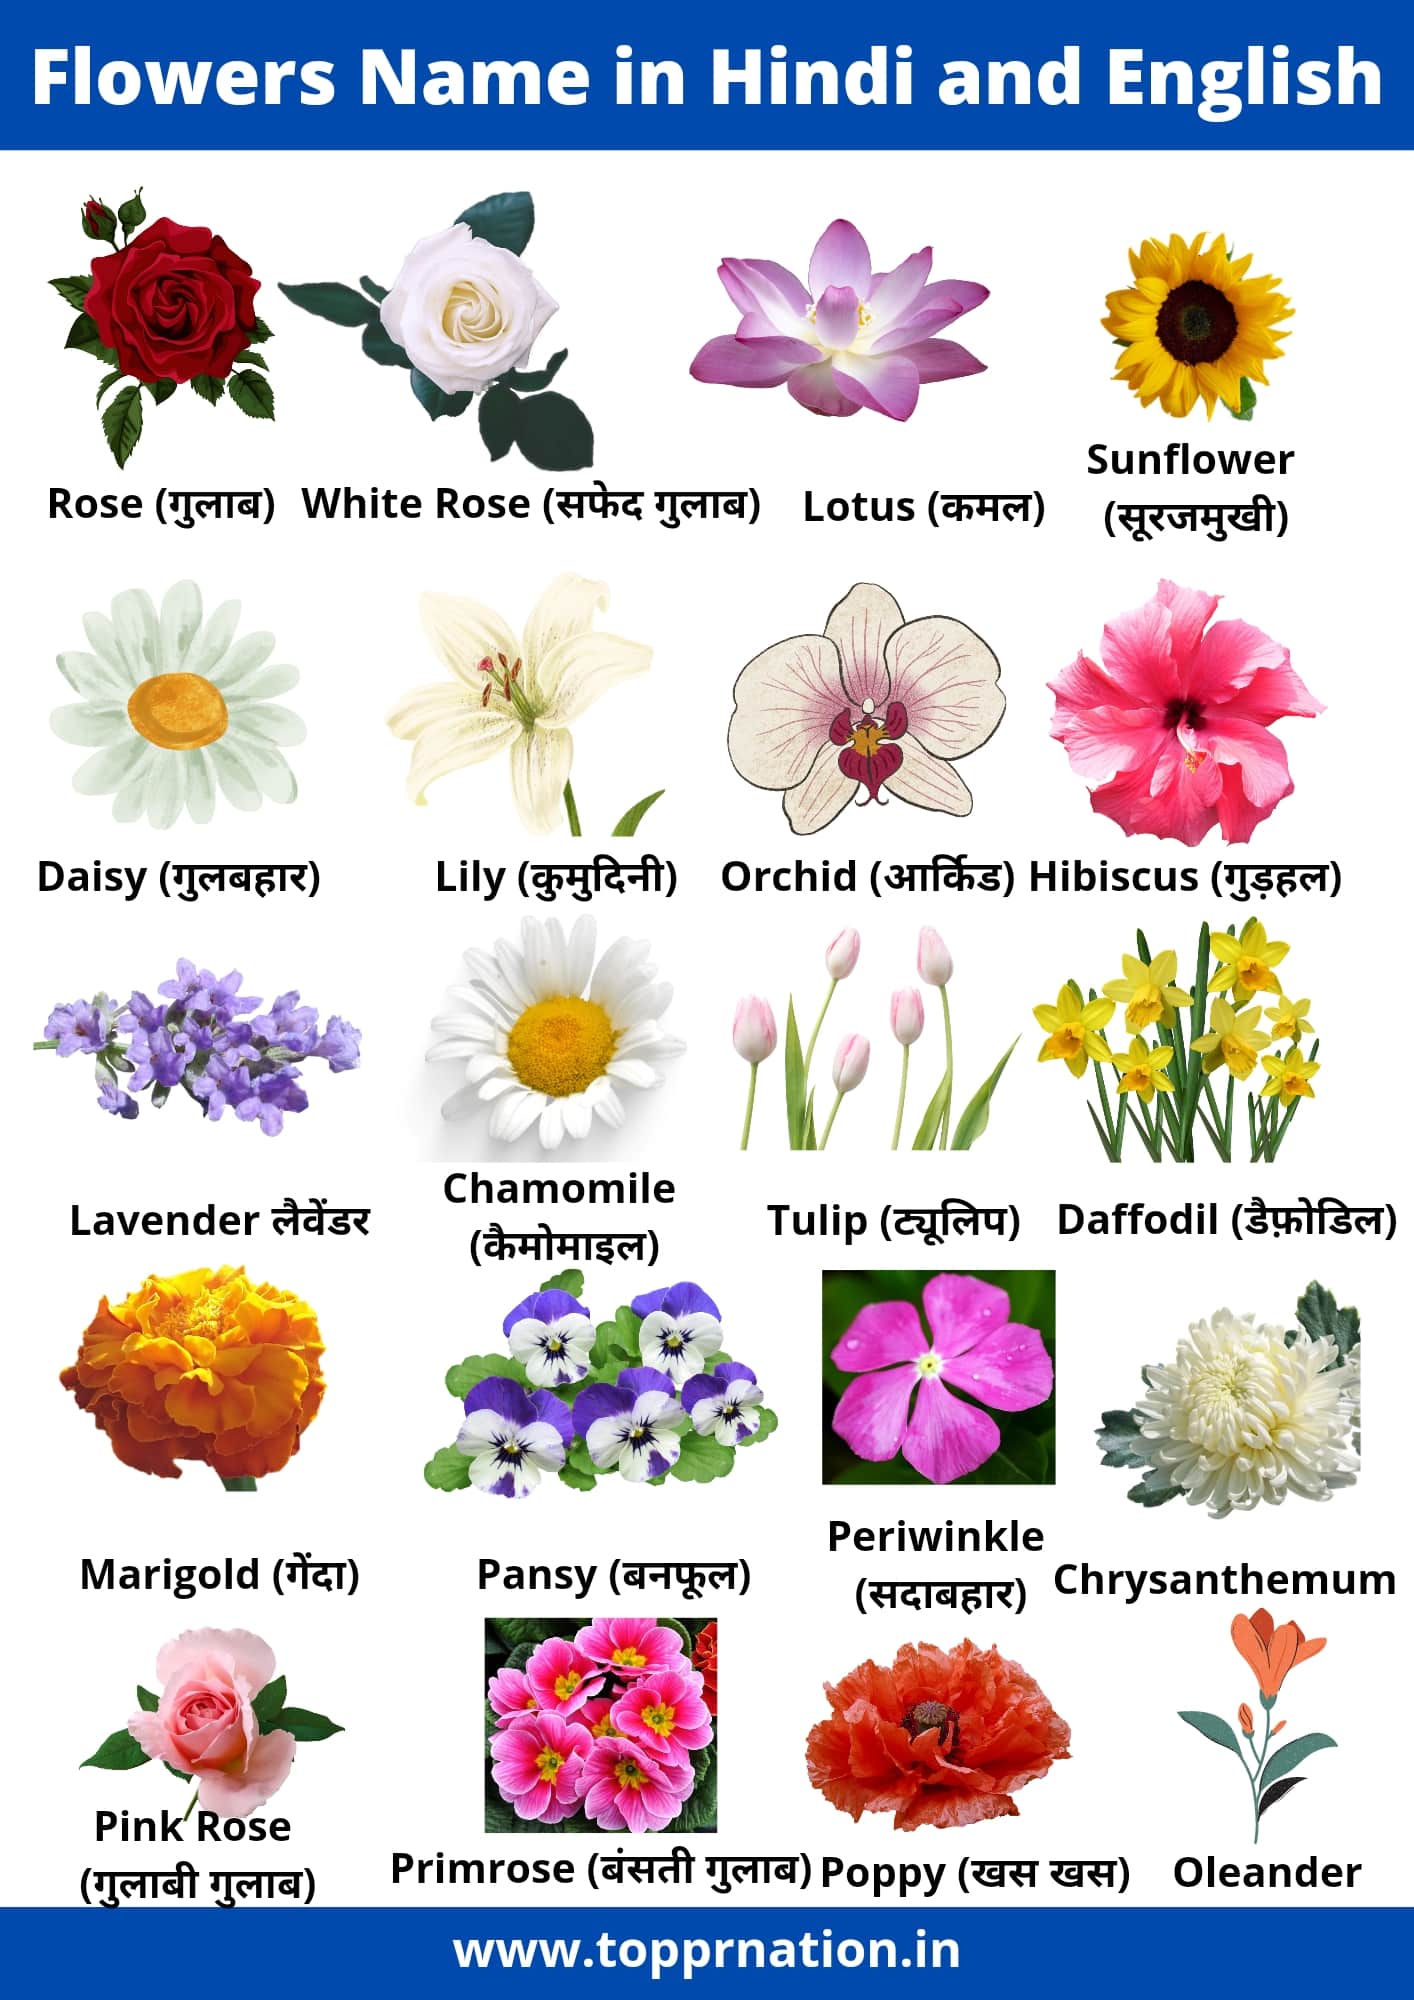 Flowers Name in Hindi and English with Pictures (list of flowers)